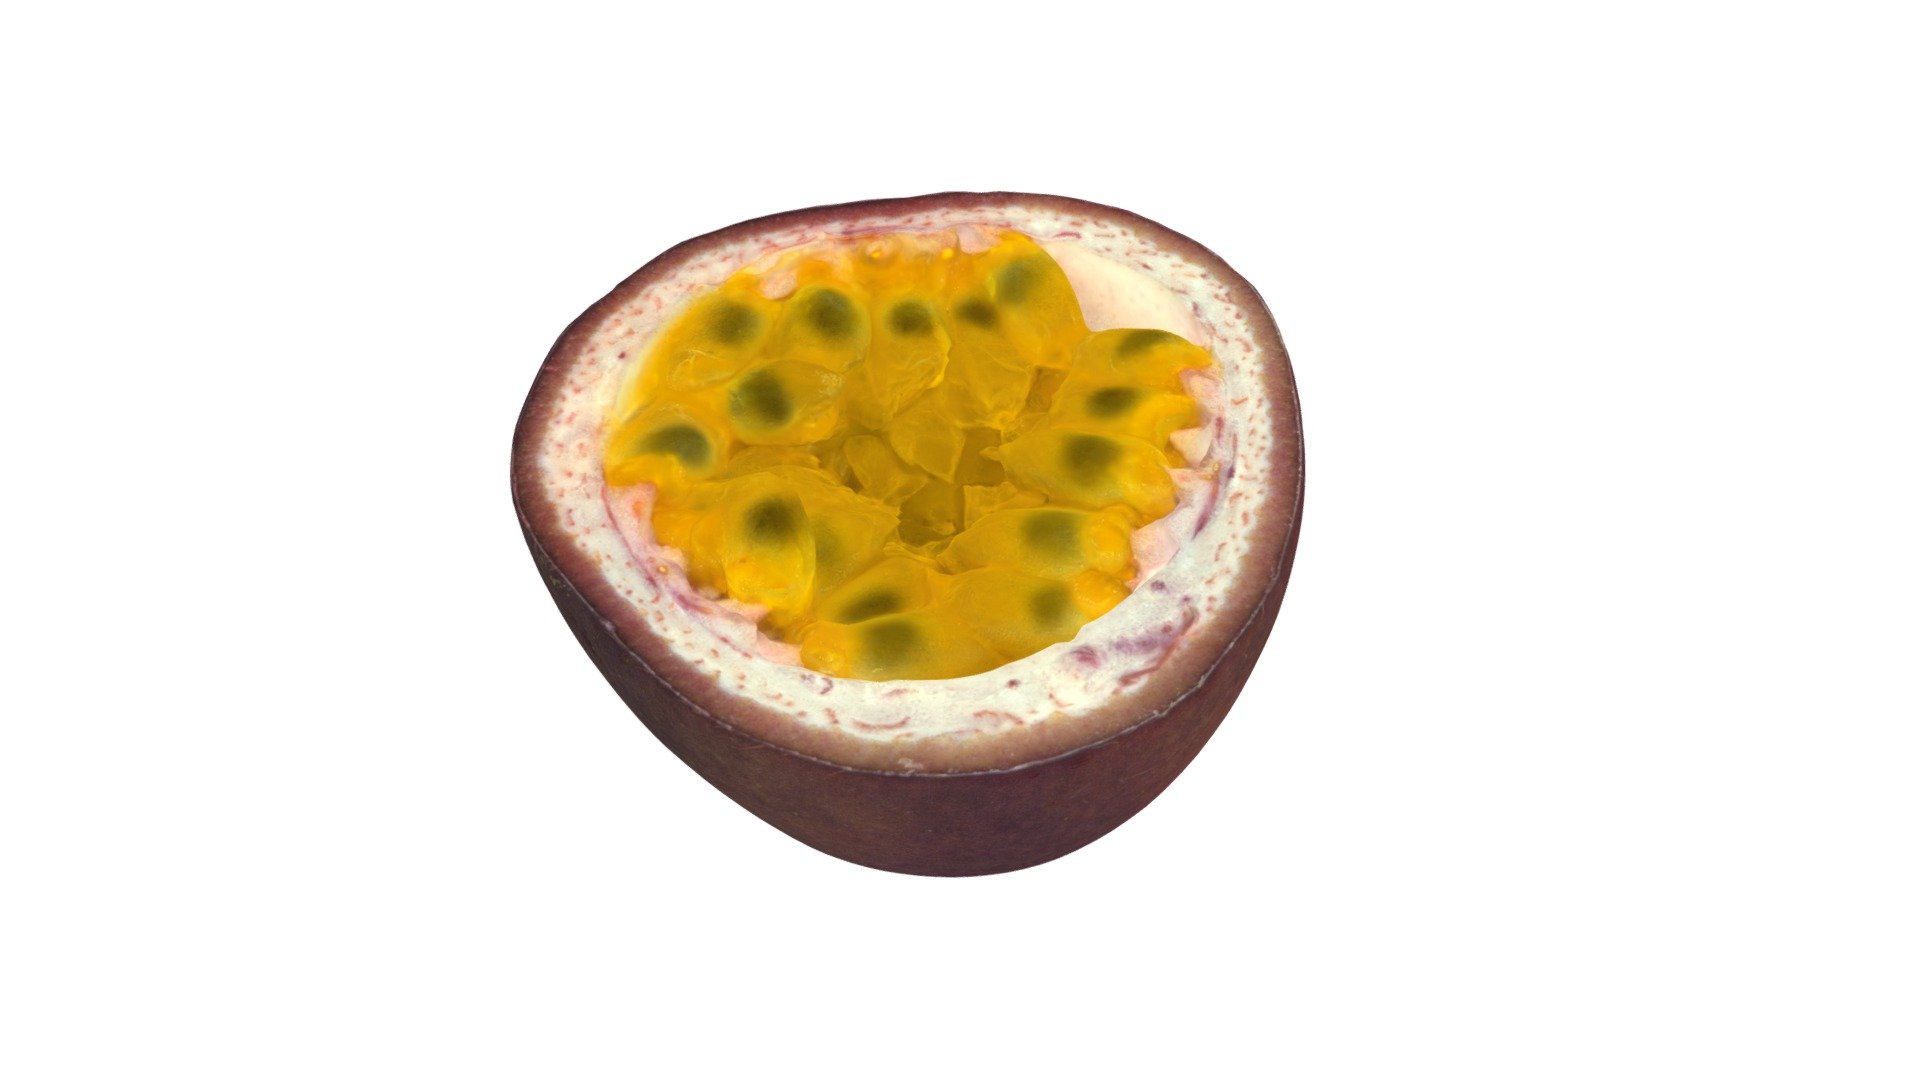 Highly detailed, photorealistic, 3d scanned model of a passion fruit half. 8k textures maps, optimized topology and uv unwrapped.

Model shown here is lowpoly with diffuse map only and 4k texture size.

This model is available at www.thecreativecrops.com 3d model